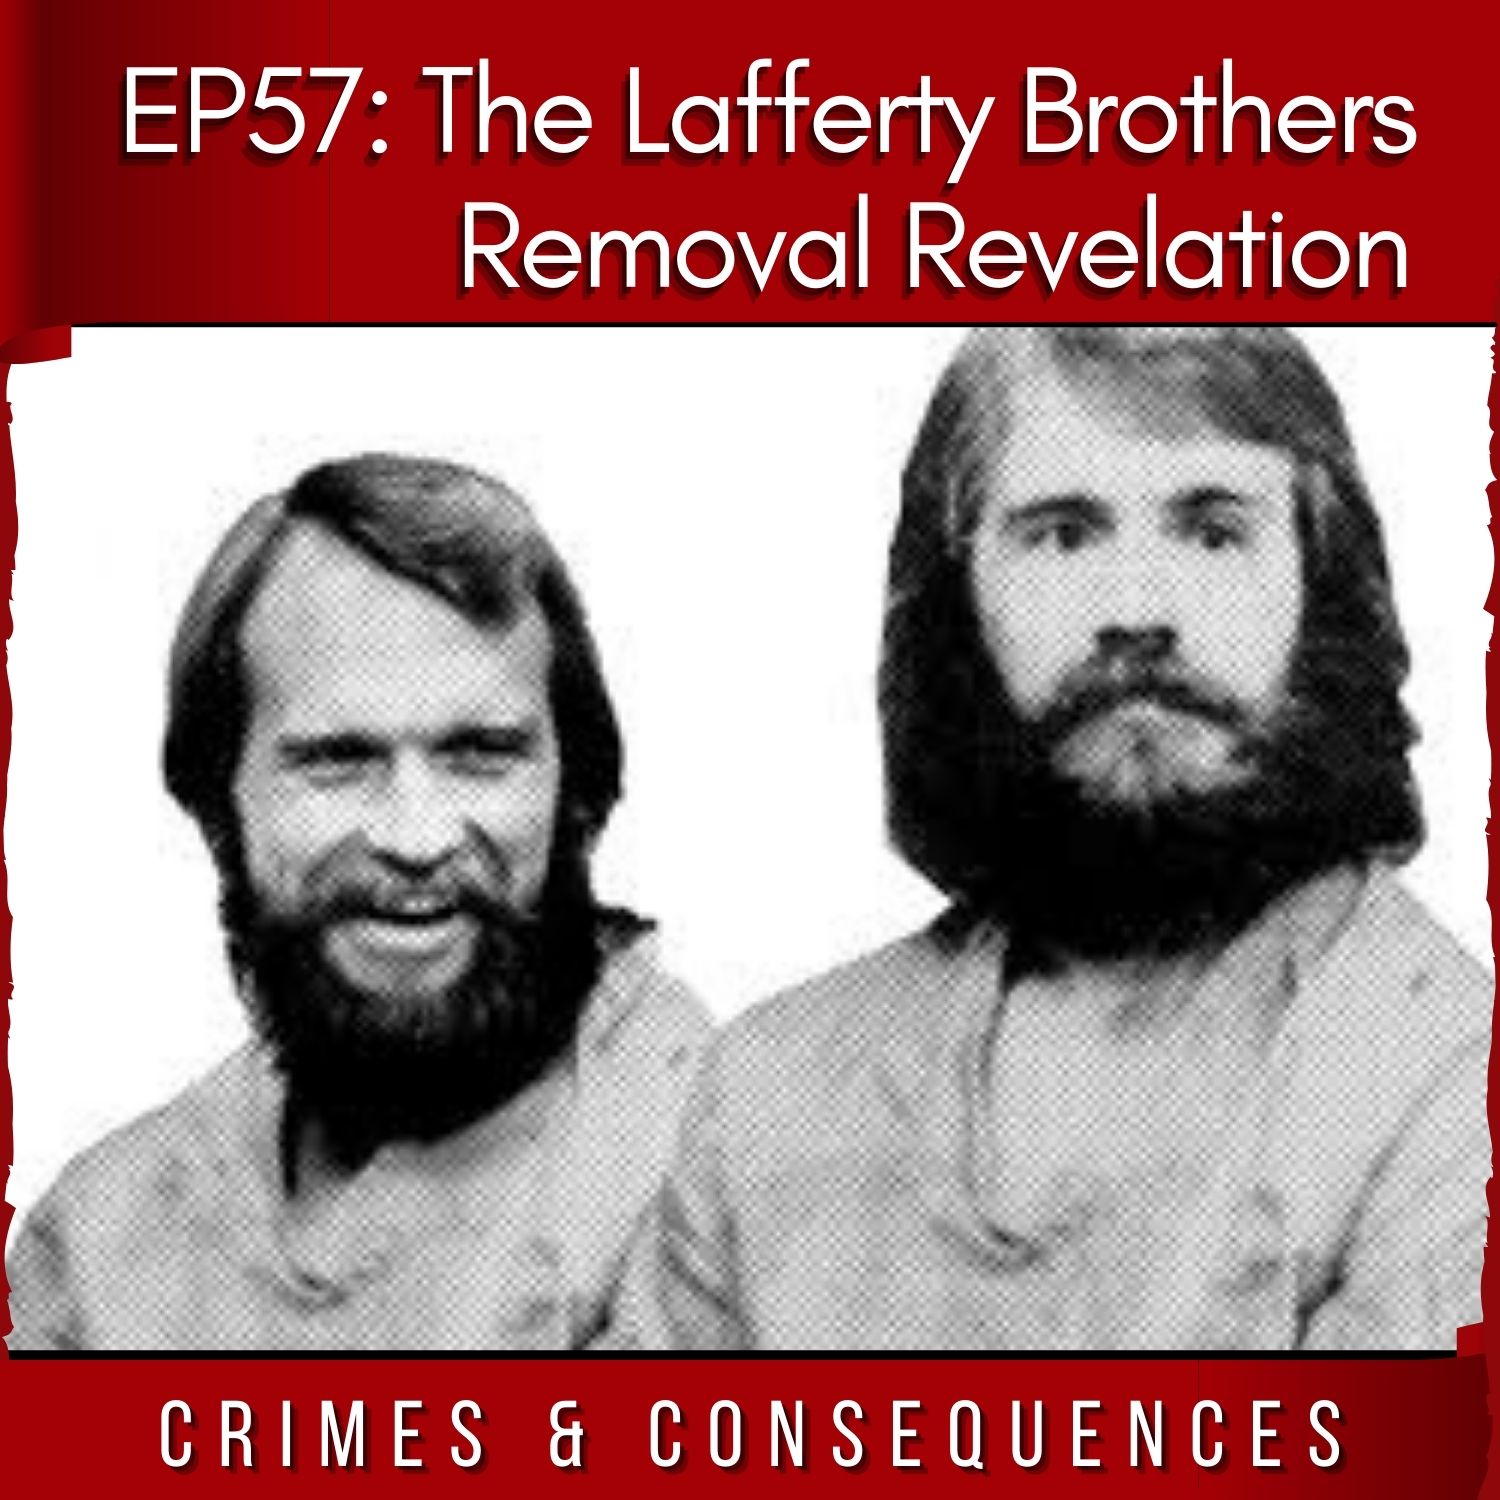 The Lafferty Brothers